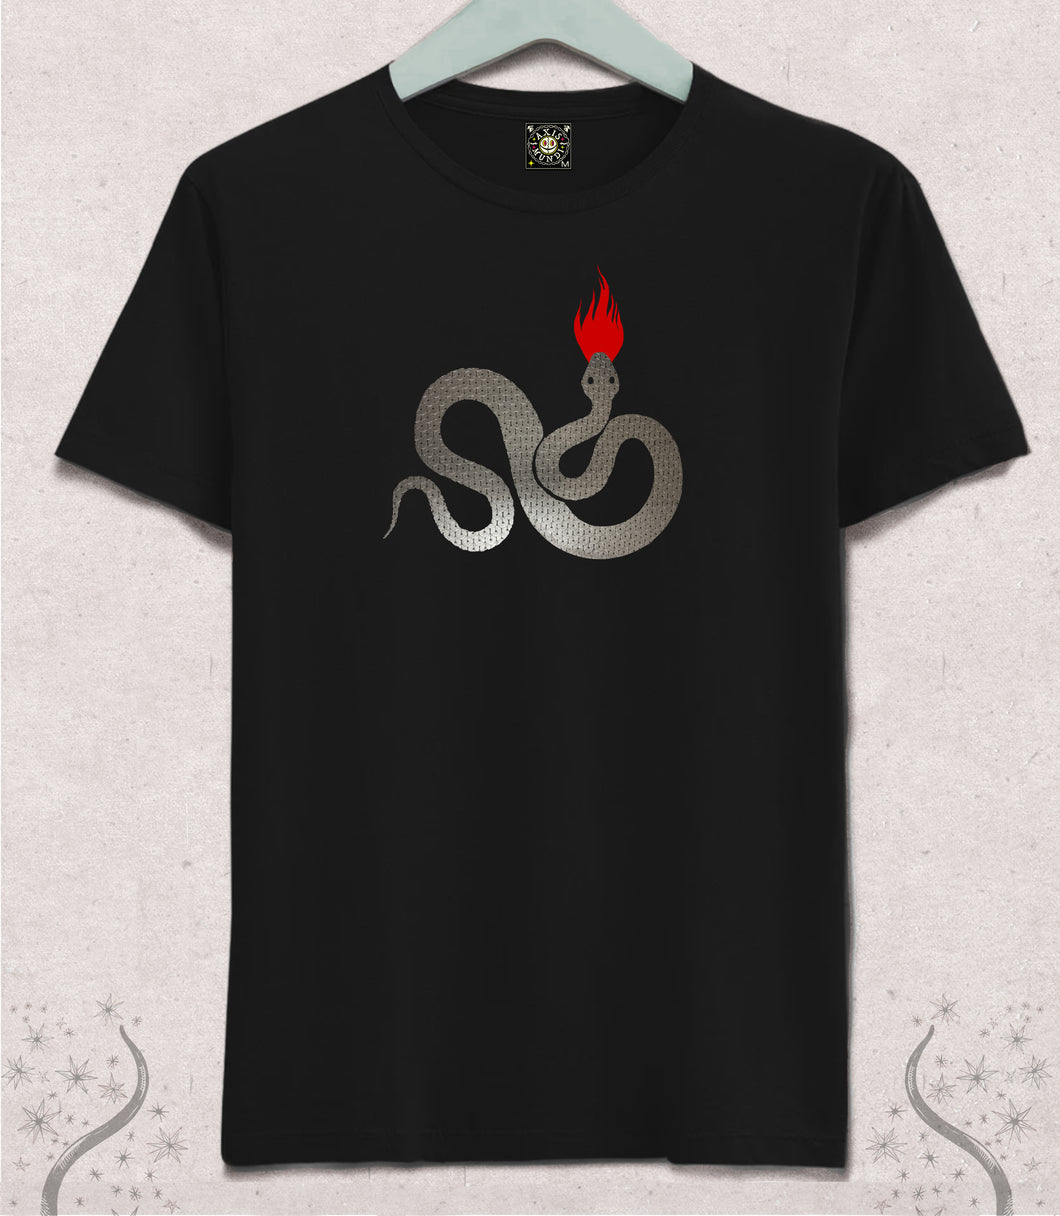 Silver Snake T-Shirt with Flame, Limited